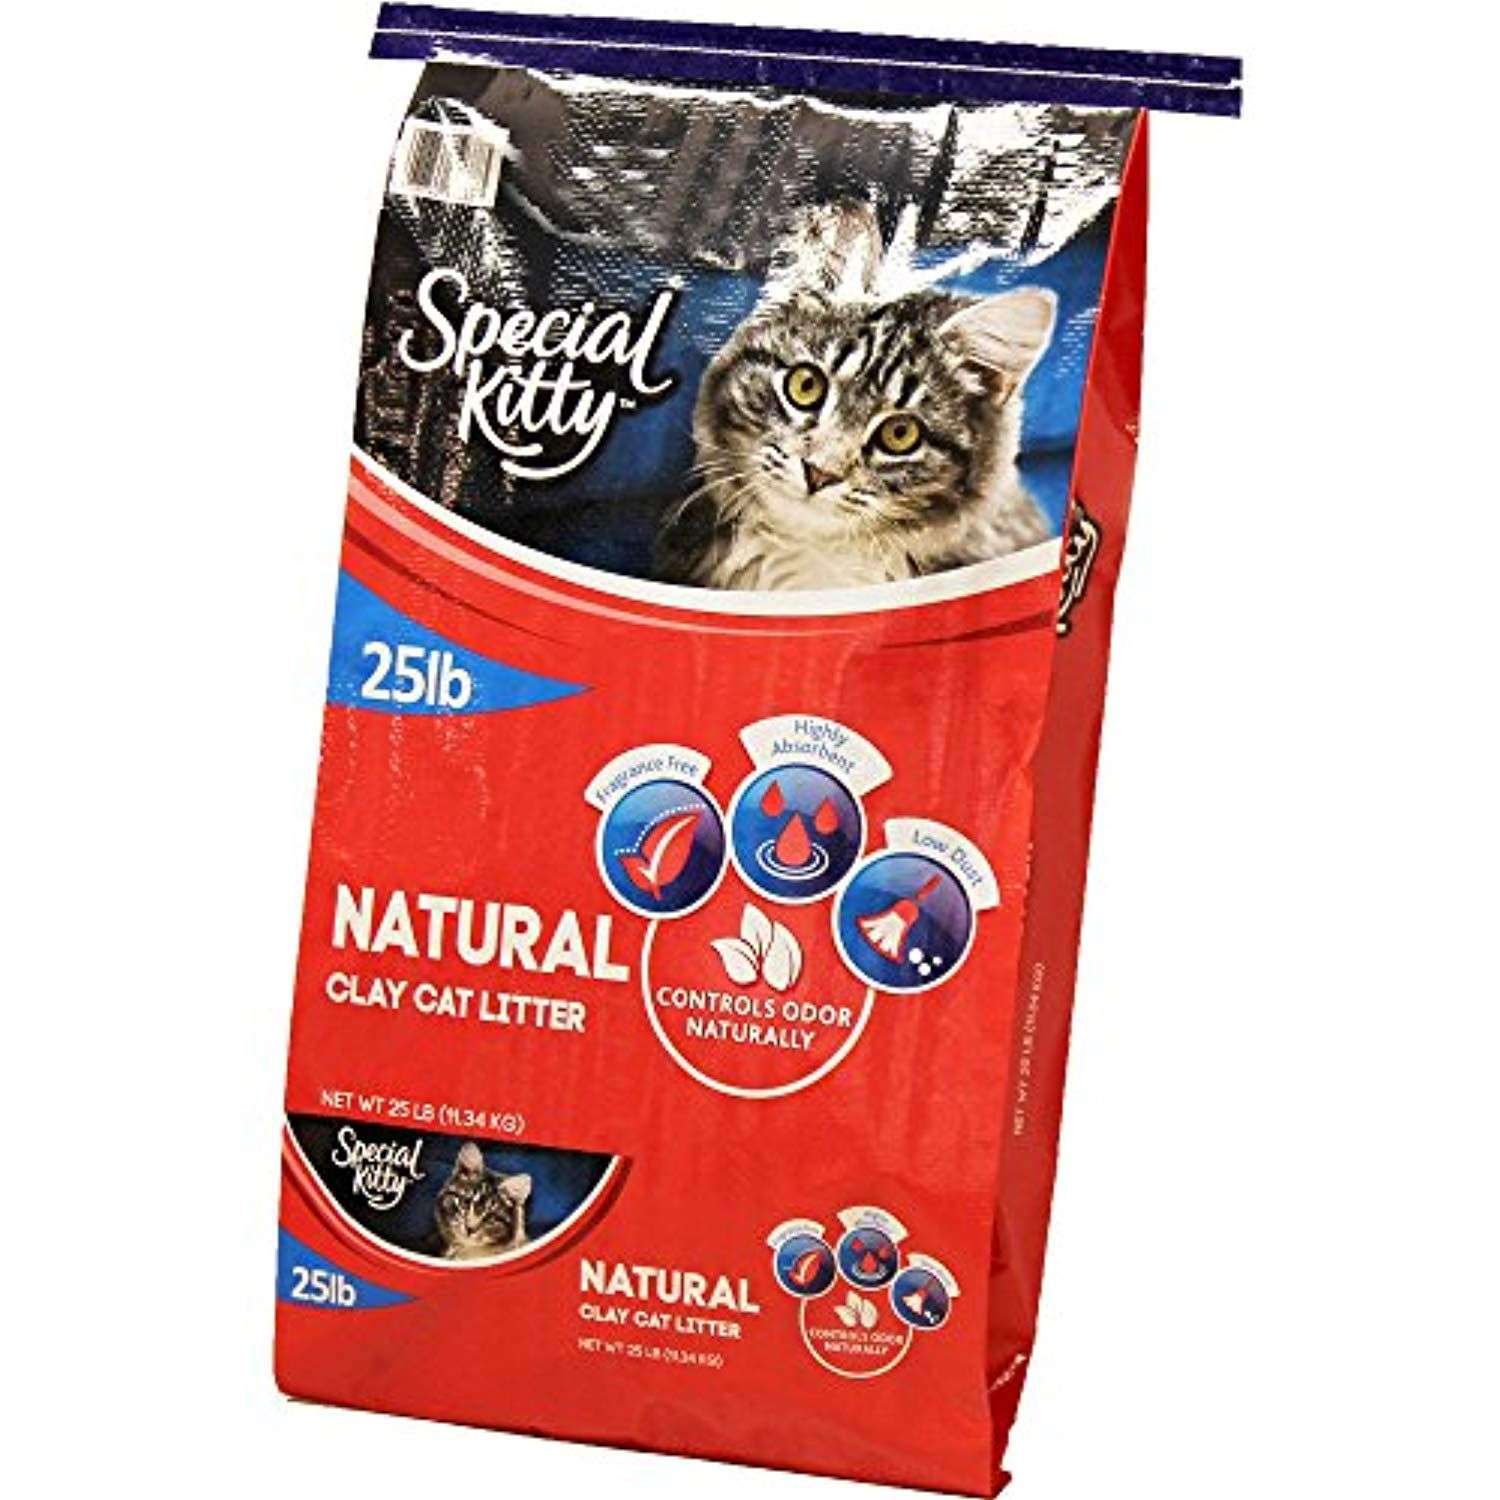 Natural Clay Cat Litter That Controls Odor Naturally, 25 ...